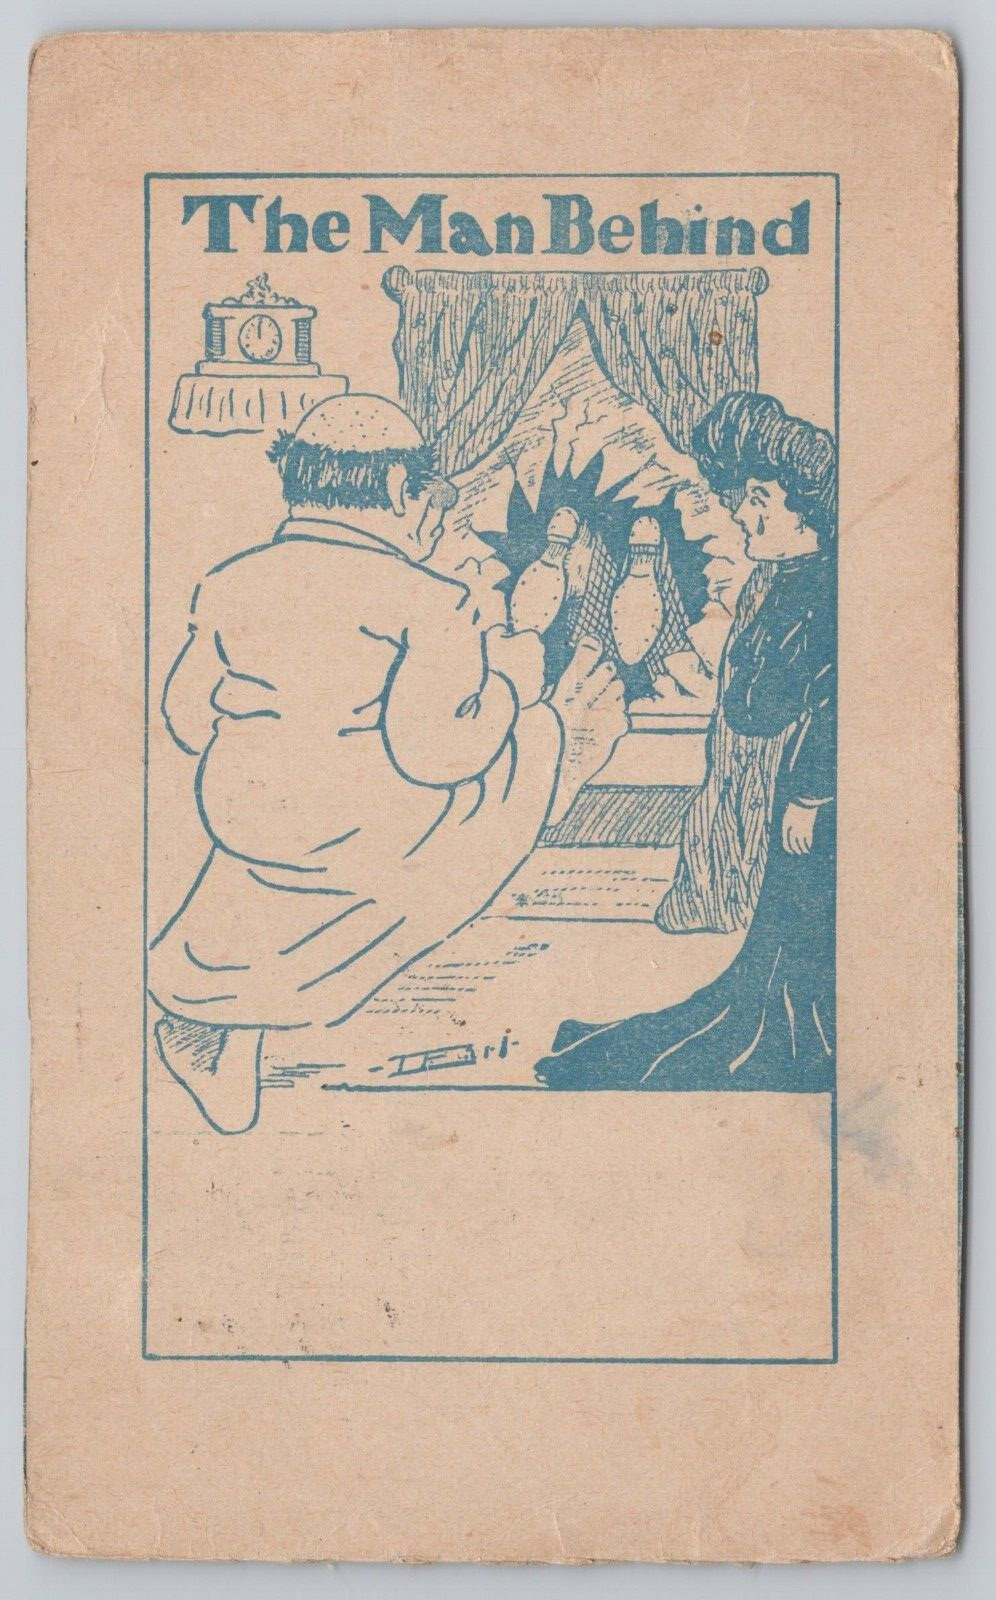 Postcard The Man Behind. Kicking Guy Through a Window. Comedy, Vintage PM 1907